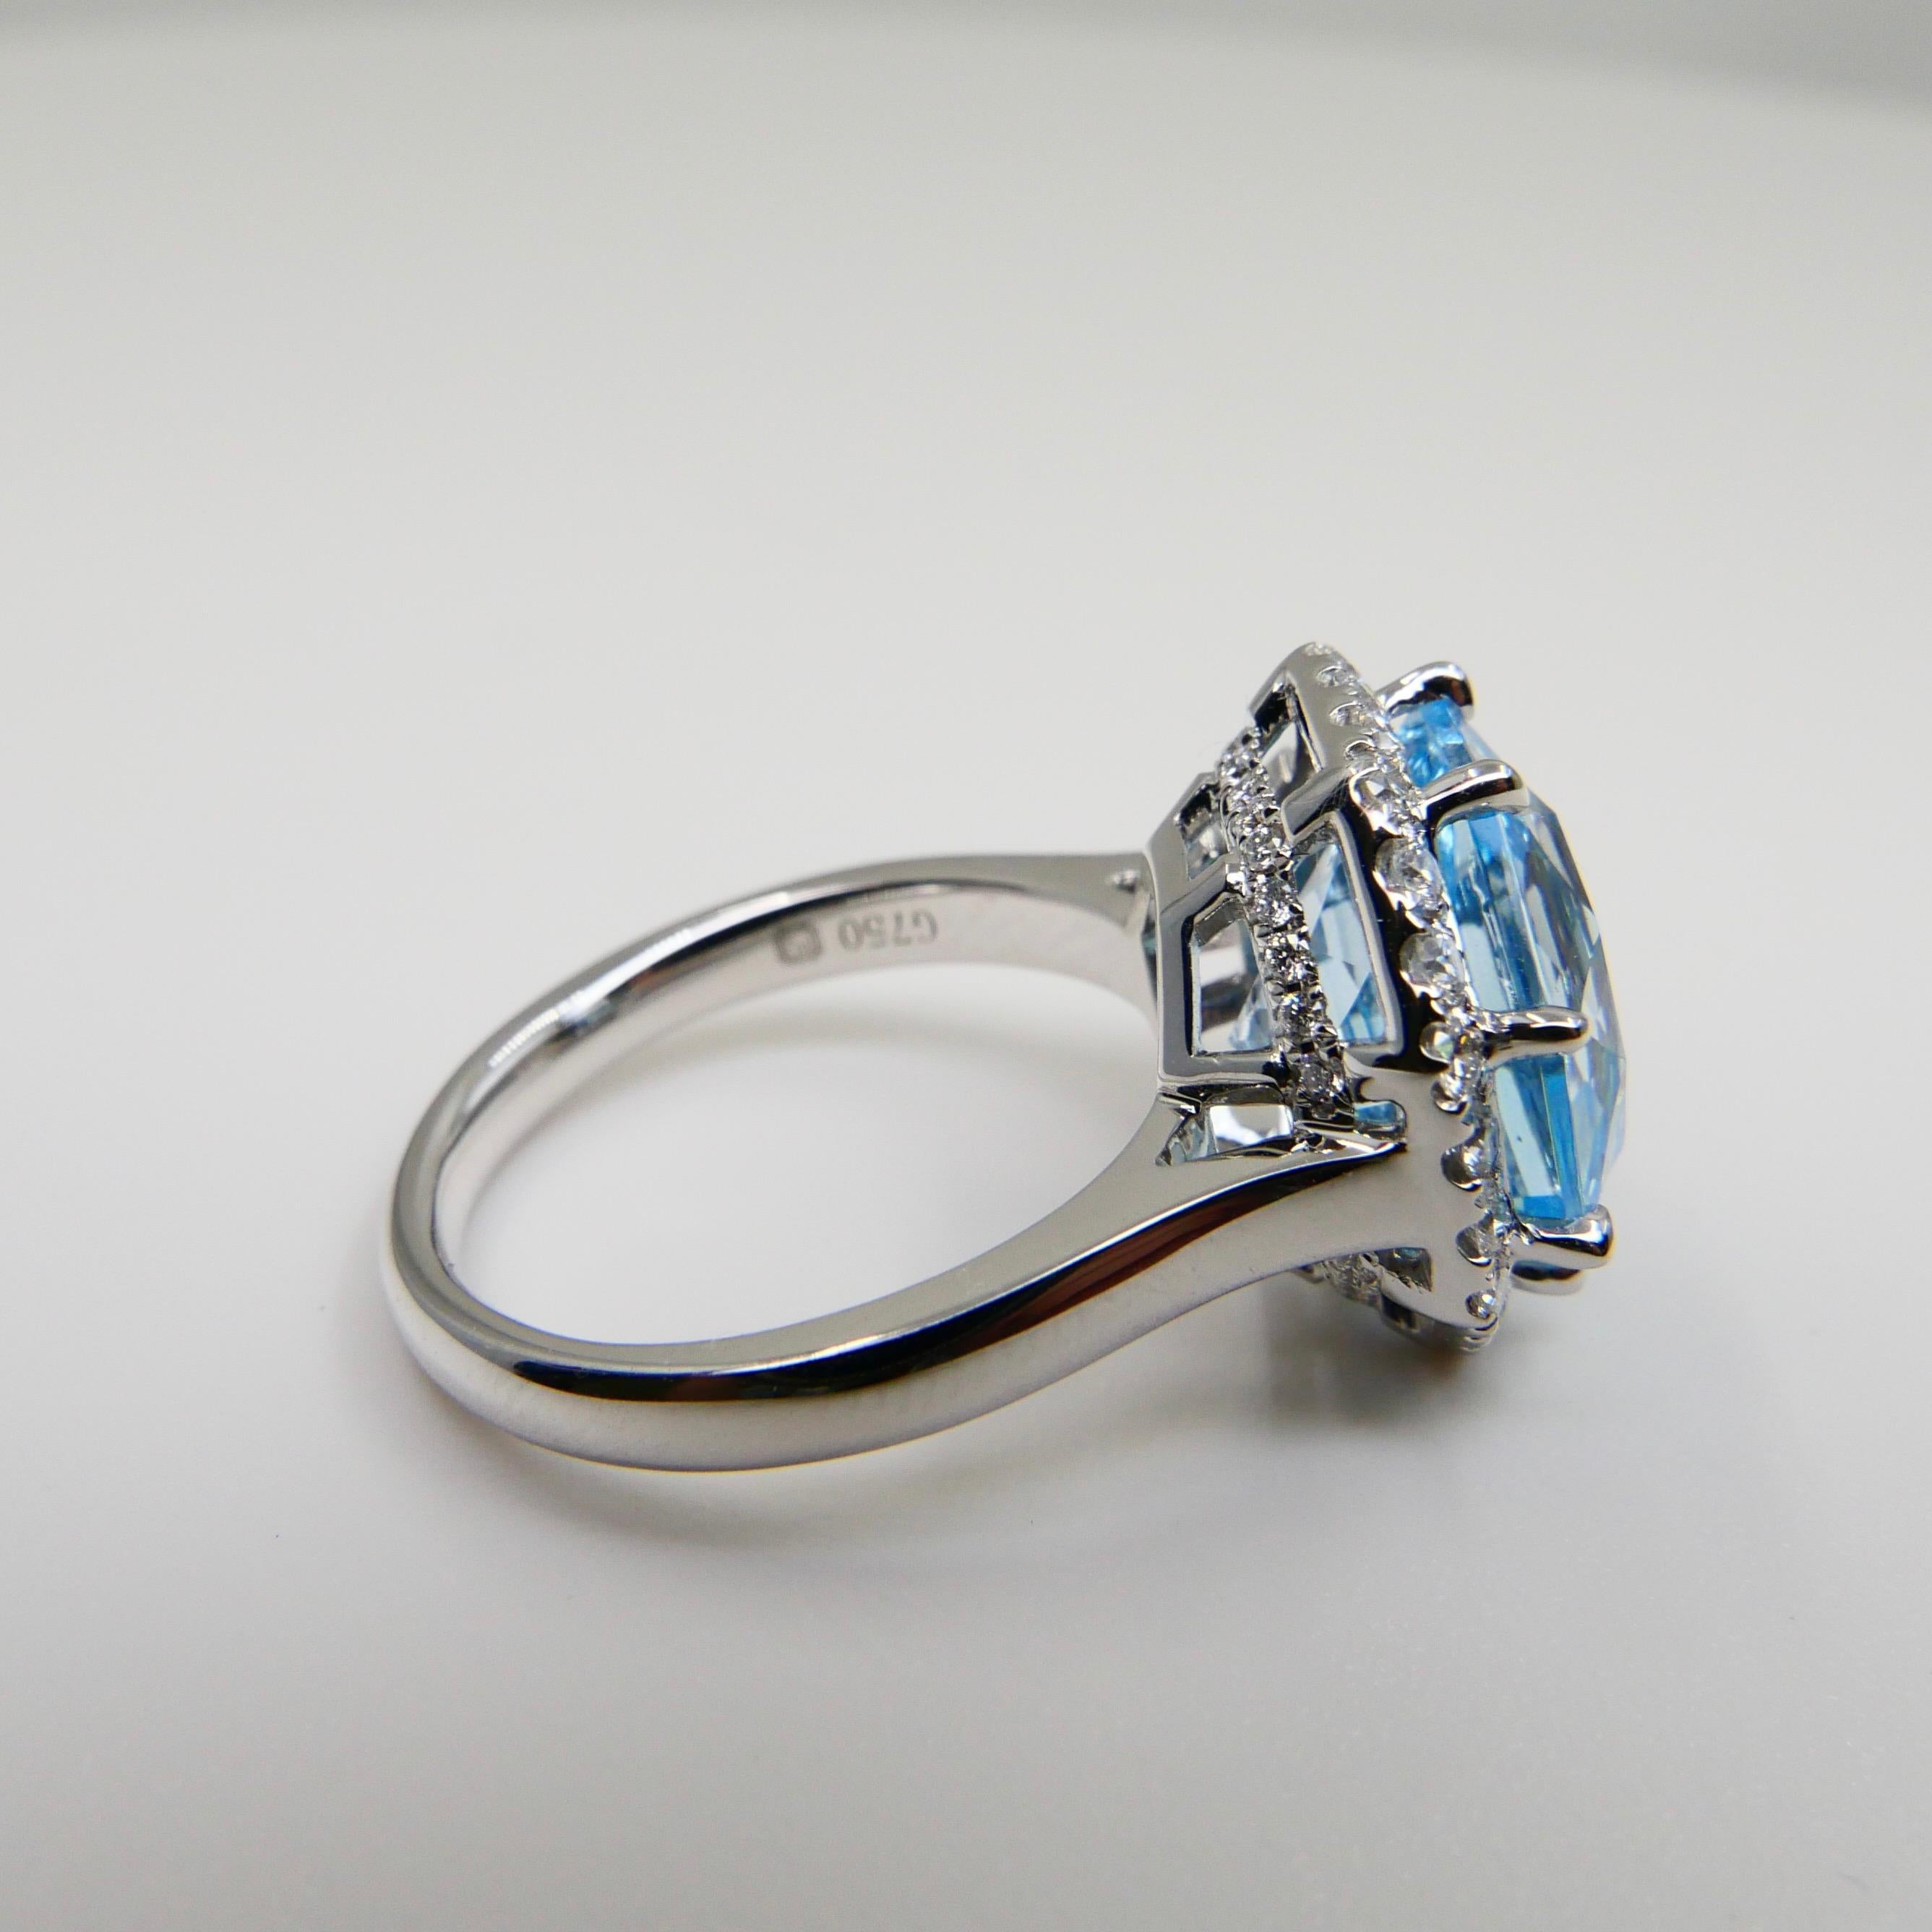 Flower Cut Powder Blue Topaz 7.86 Cts and Diamond Cocktail Ring, Statement Ring For Sale 3